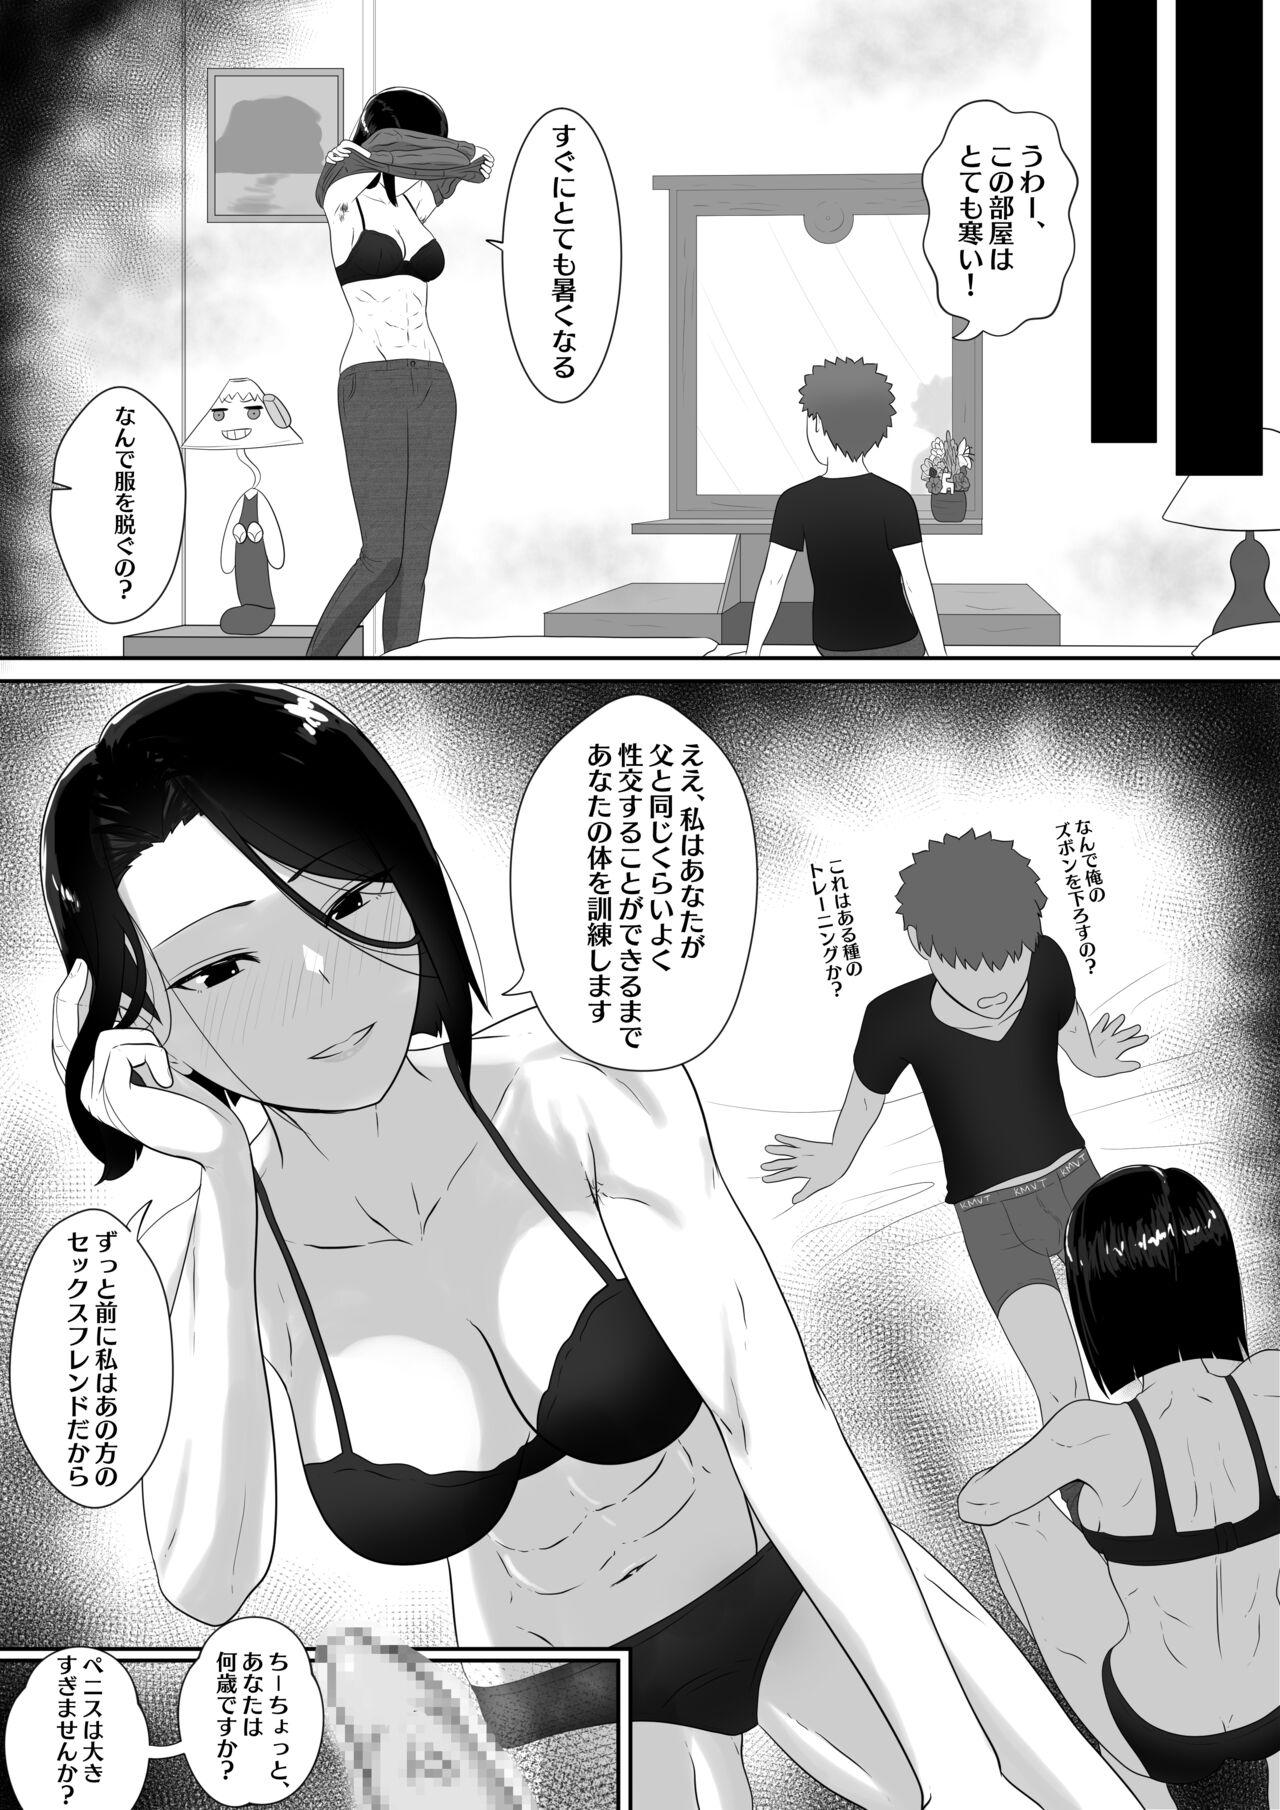 Exposed 舞弥先生との秘密の調教 - Fate zero Awesome - Page 3